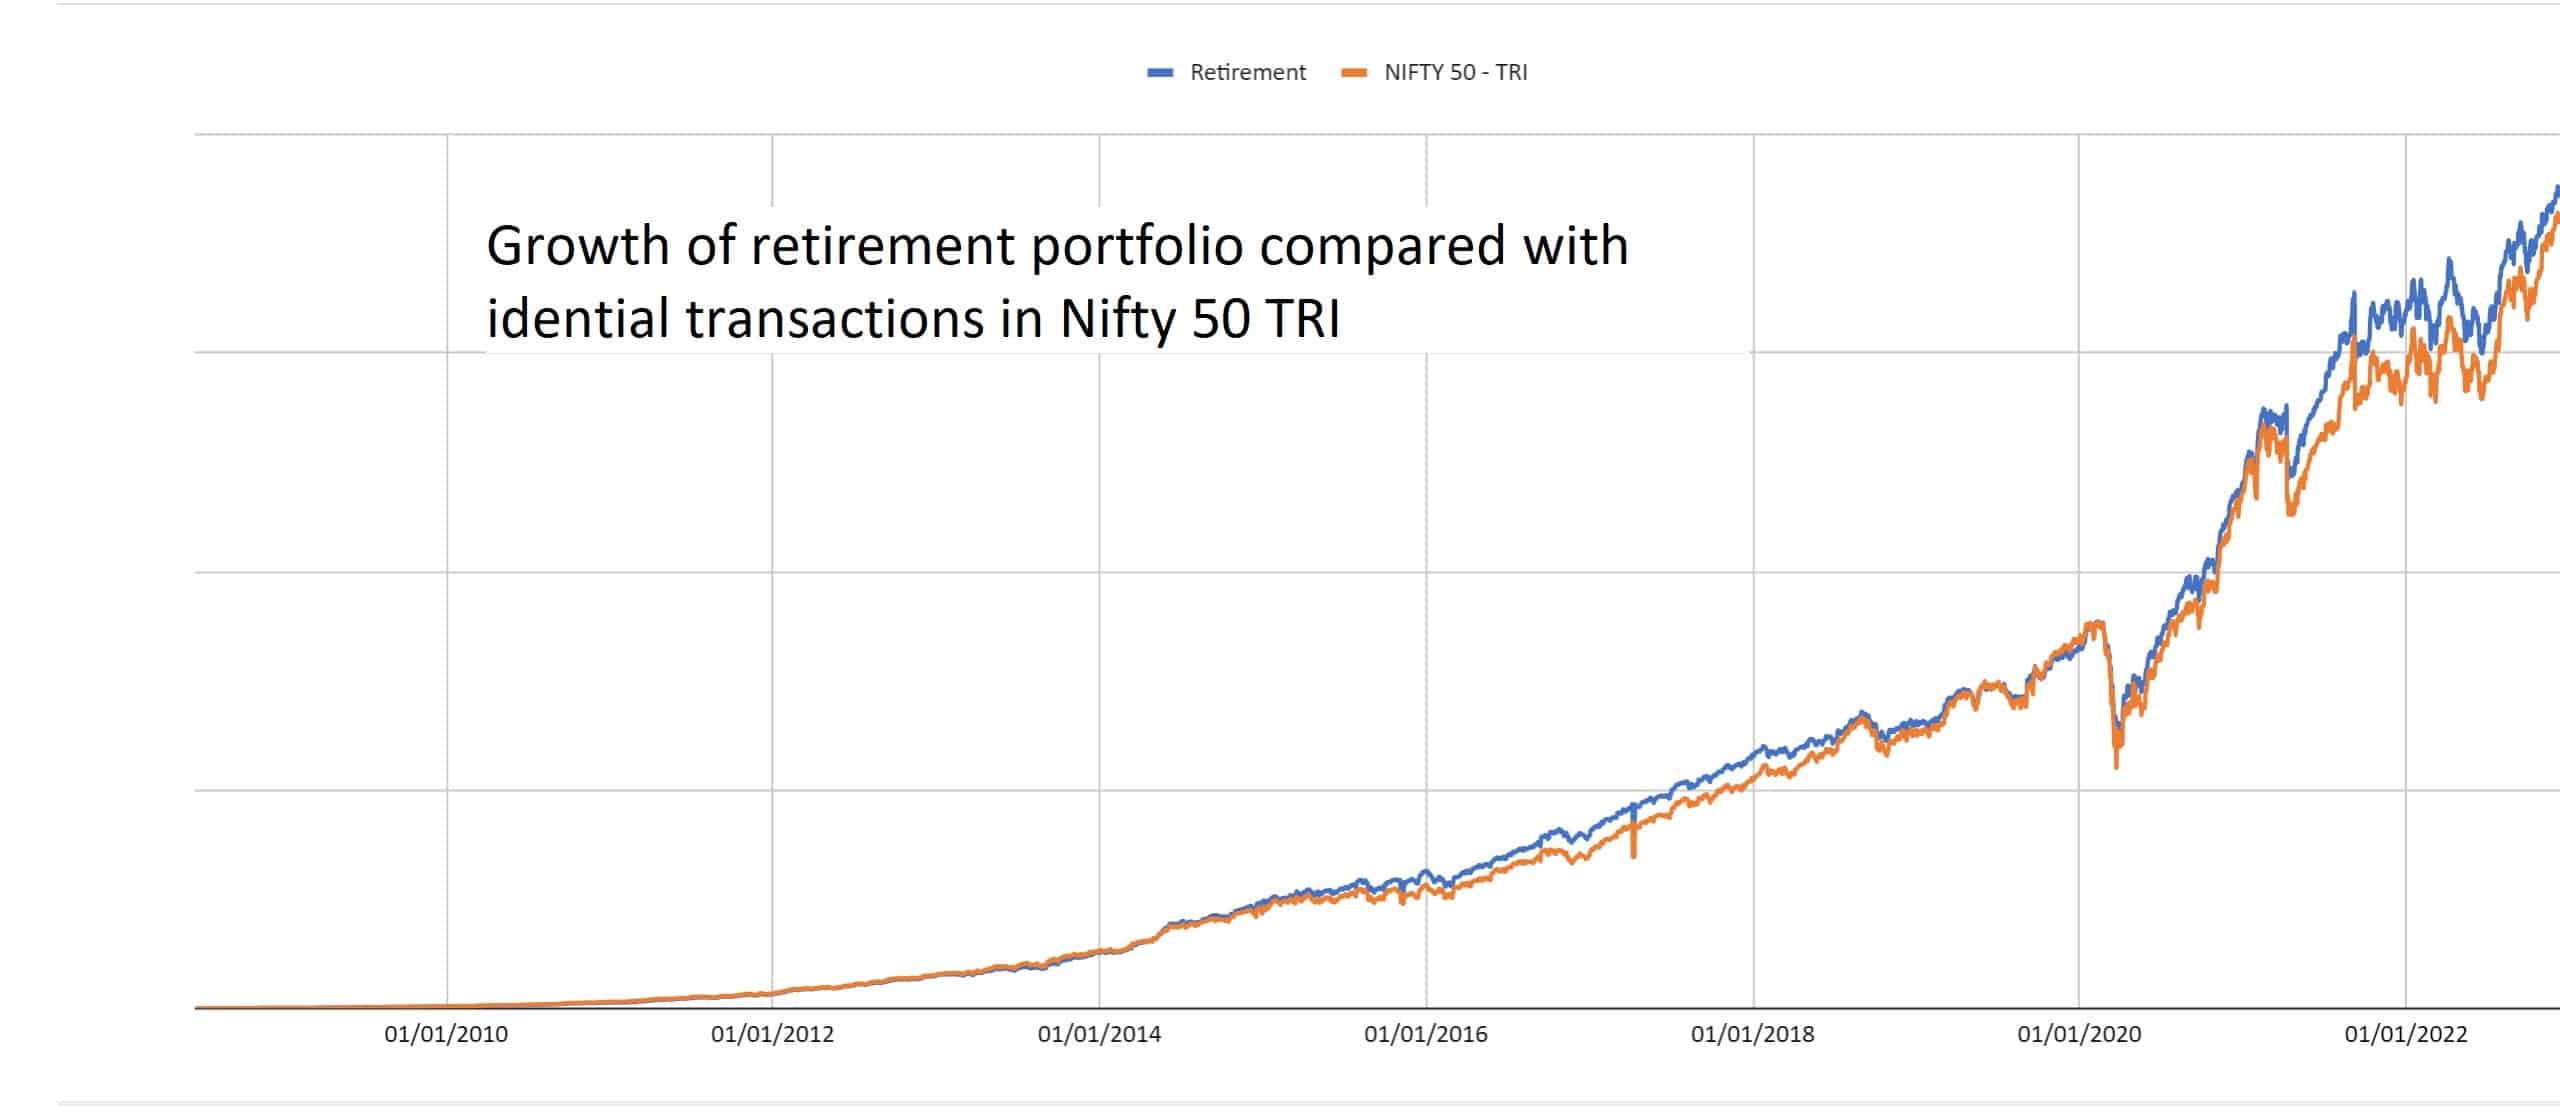 Growth of retirement portfolio compared with identical transactions in Nifty 50 TRI